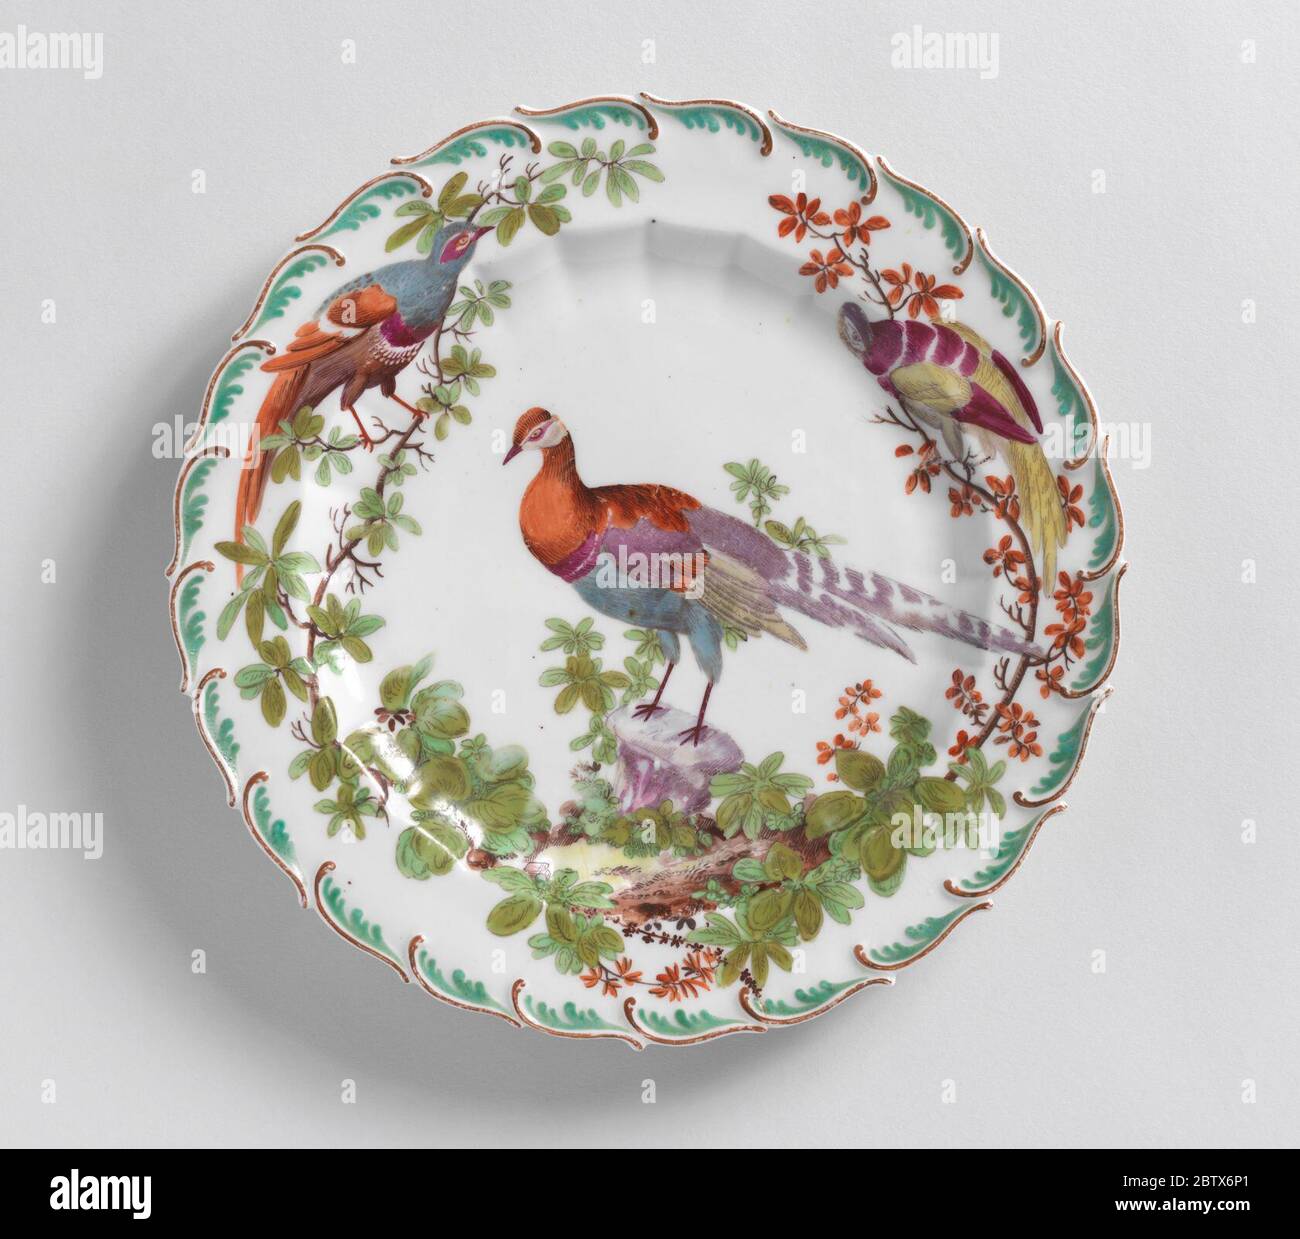 Fruit or Dessert Plate with Disheveled Birds. Research in ProgressScalloped edge with green feather motif. Fluted cavetto. At center, a tropical bird. Stock Photo